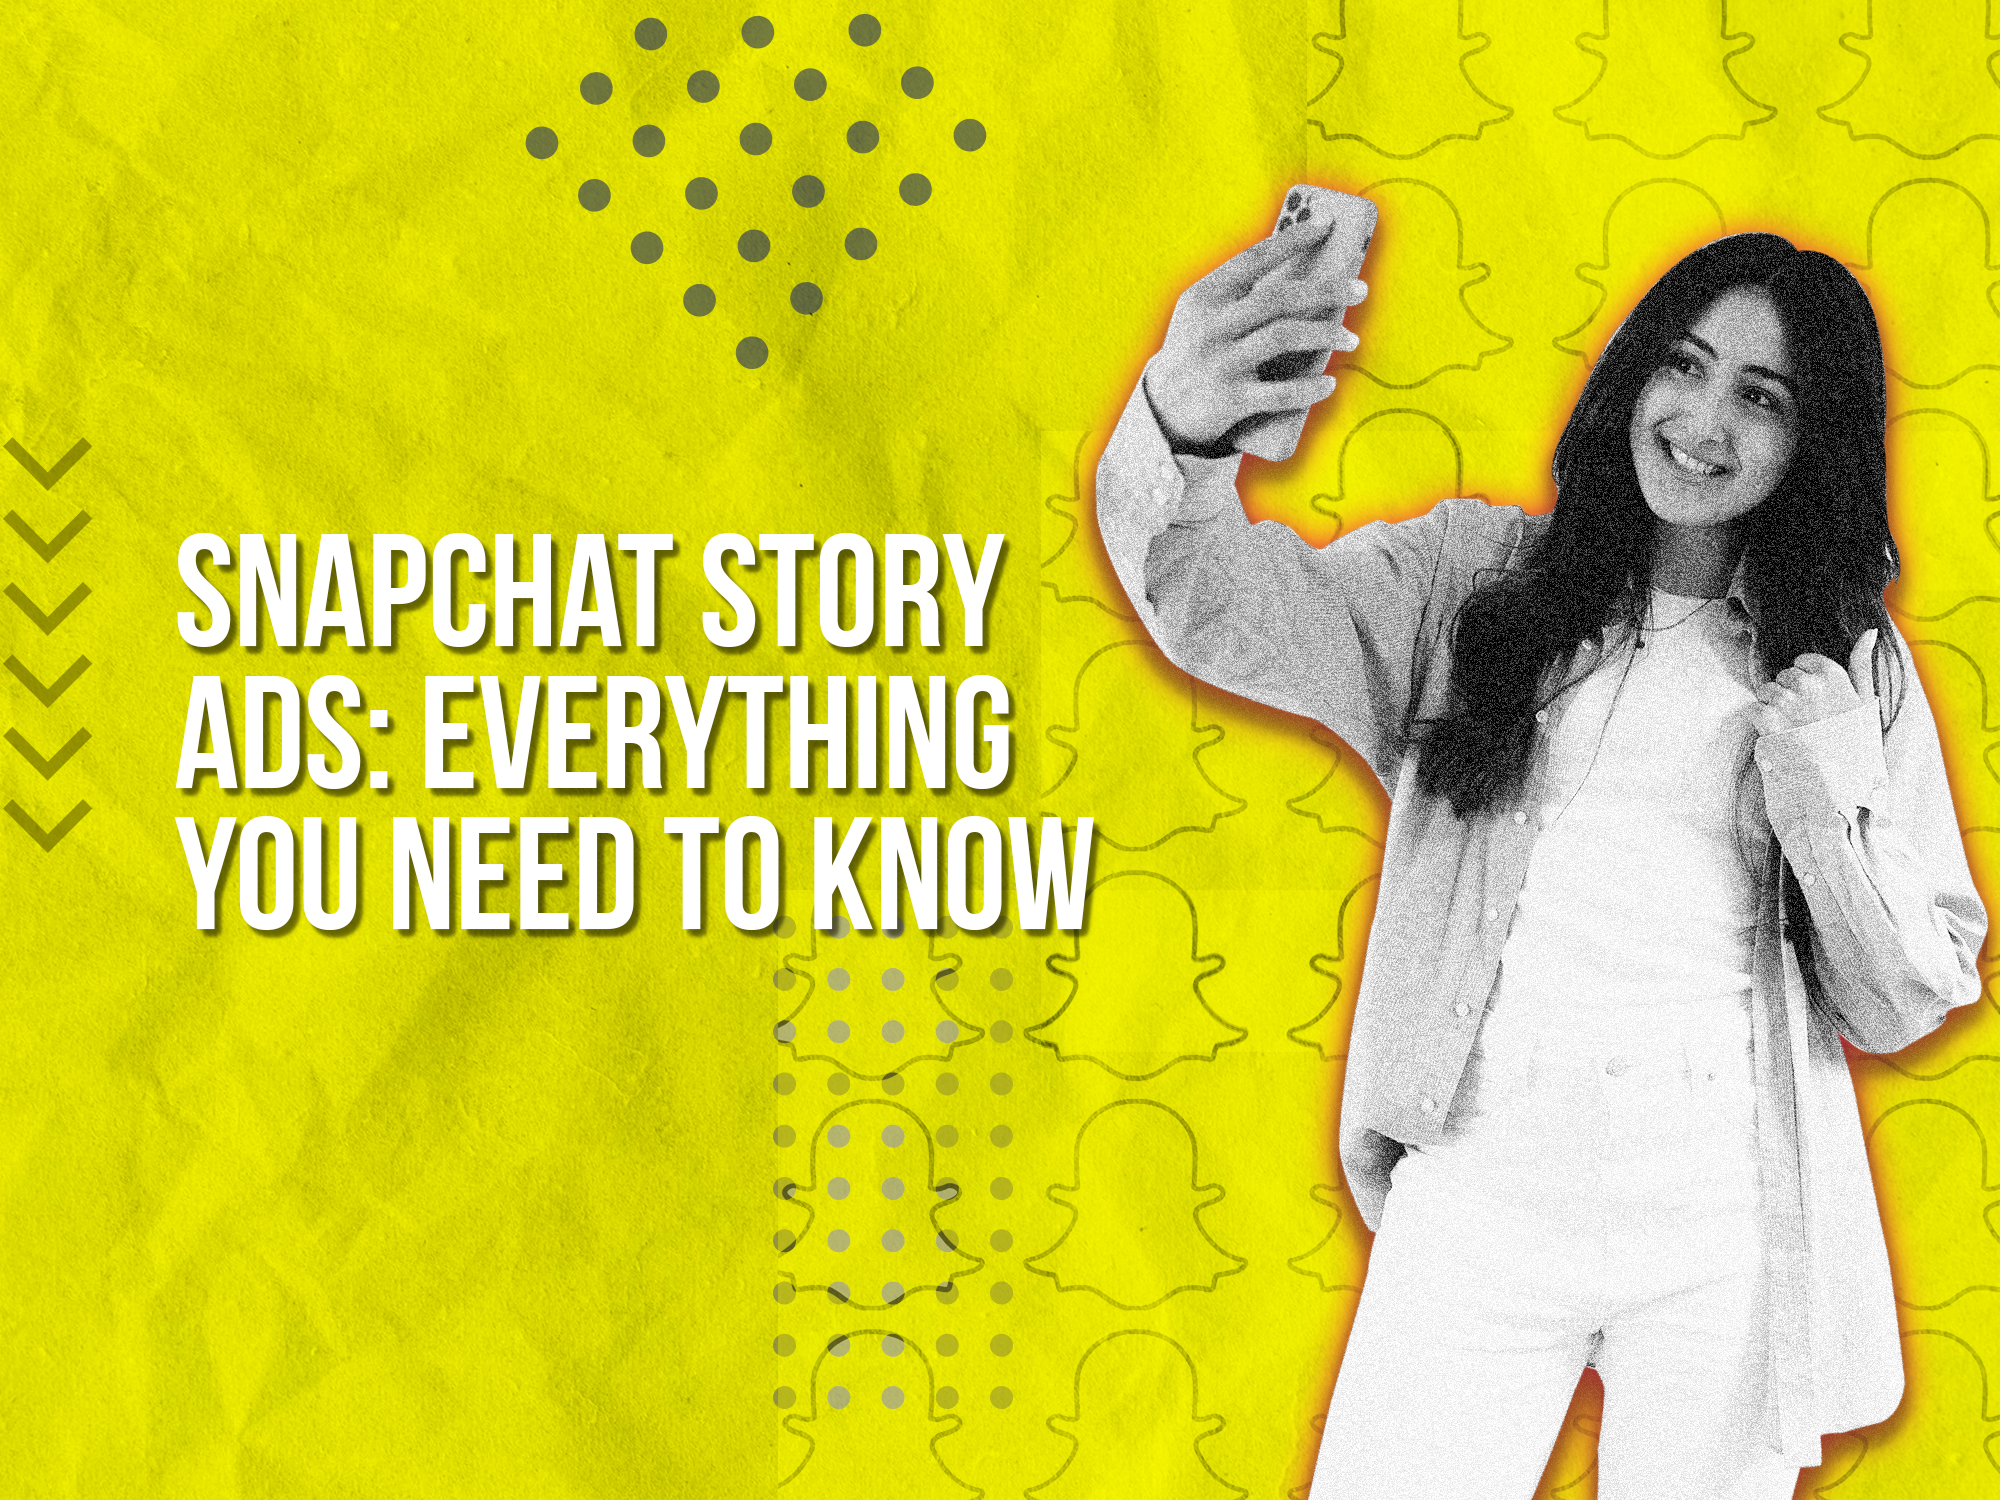 Snapchat Story Ads: Everything You Need to Know